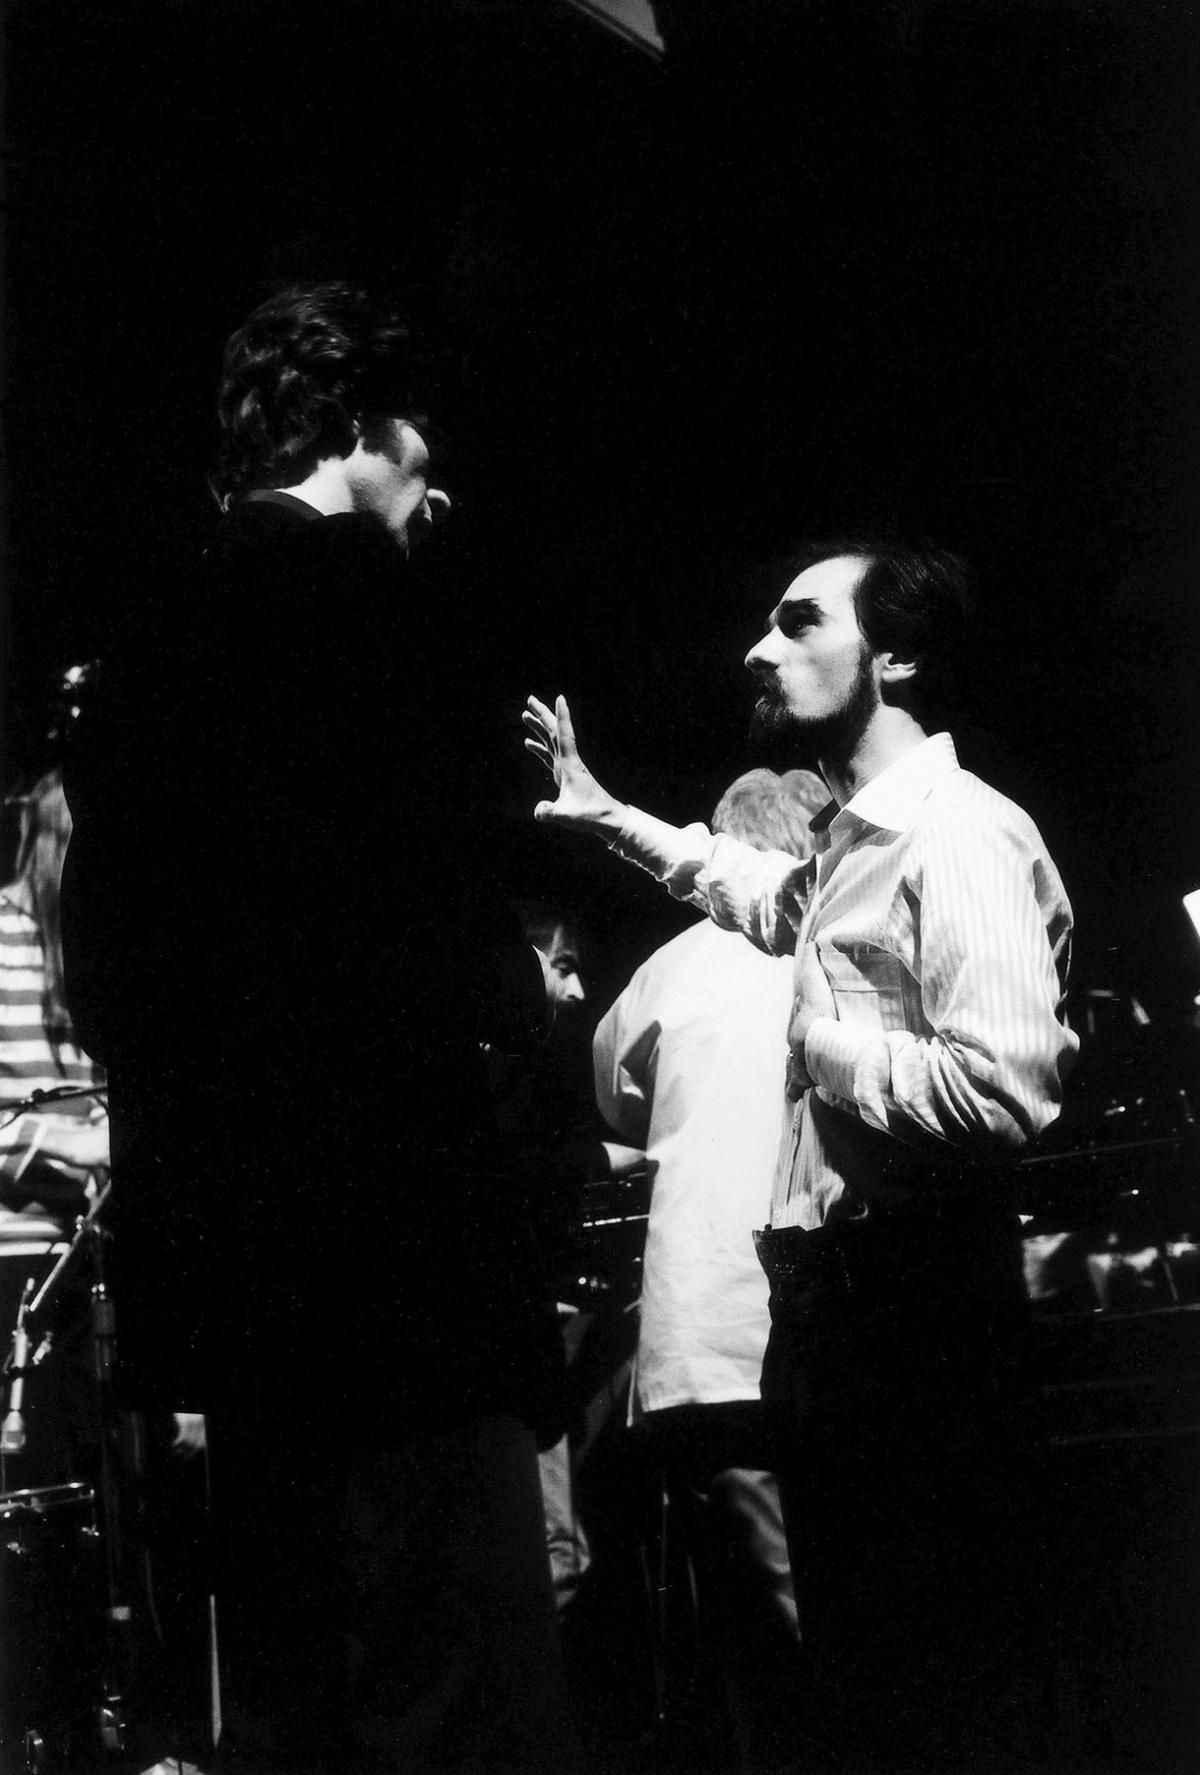 Scorsese and Robertson talk onstage during filming